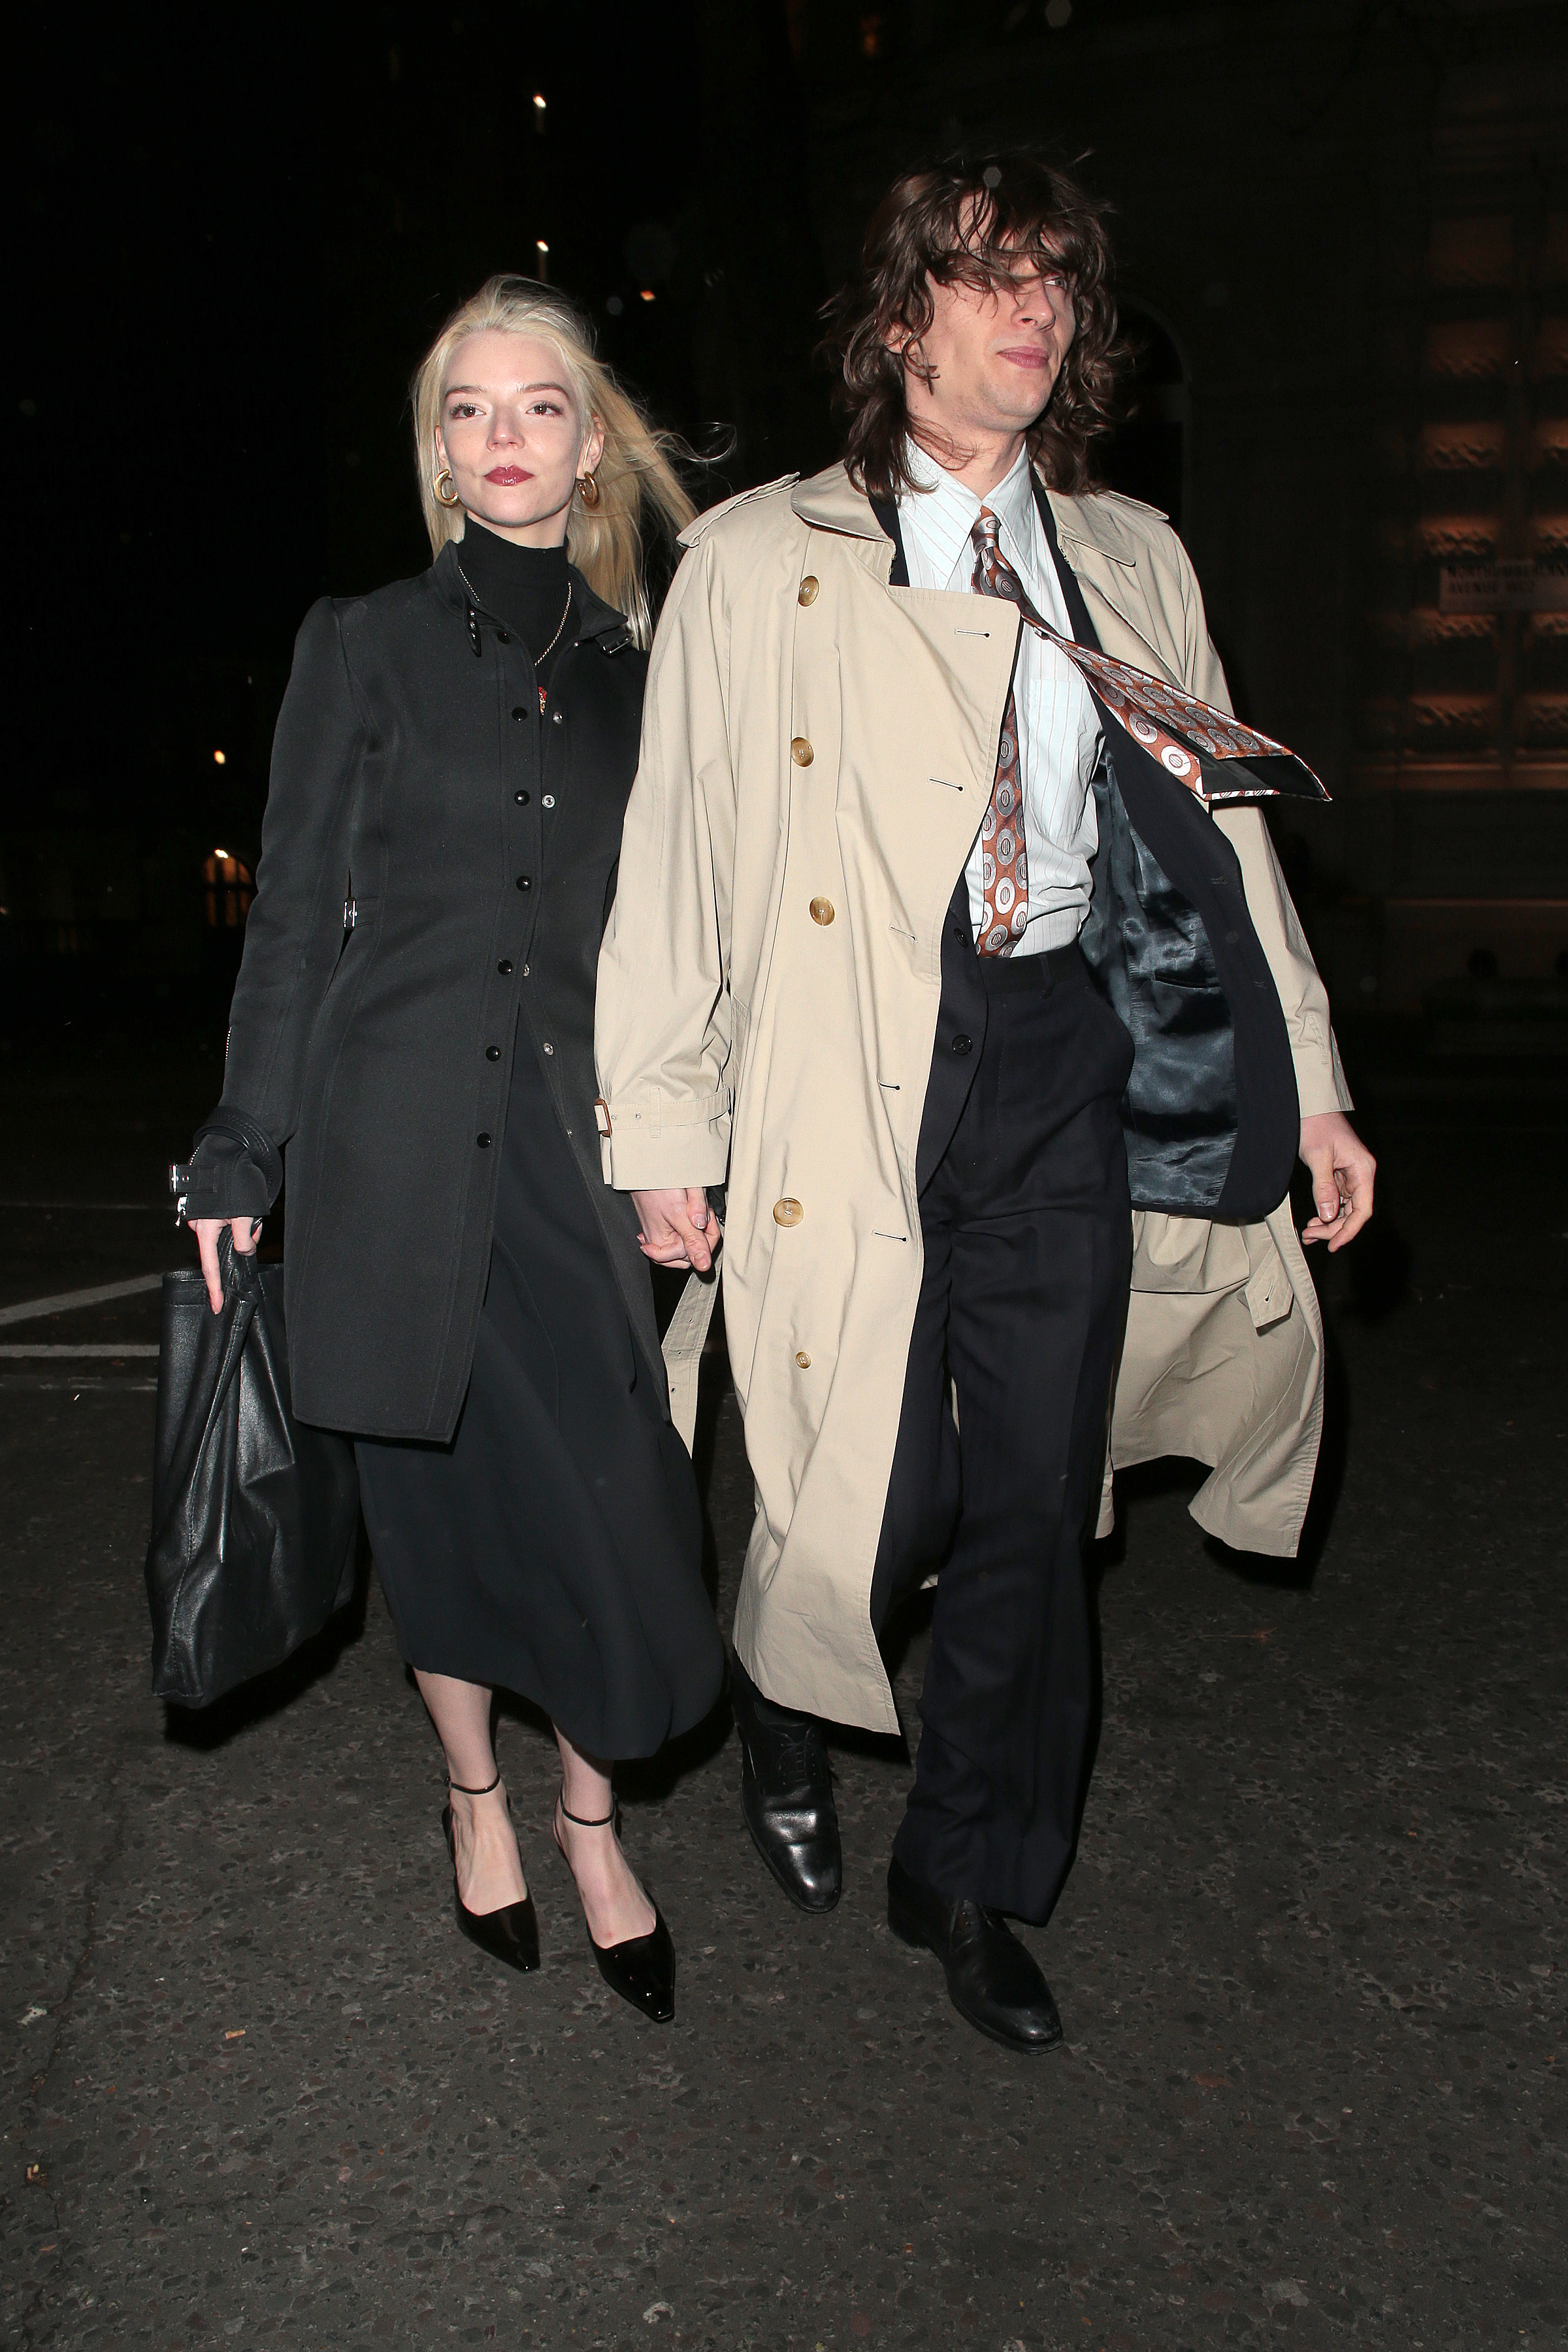 Two celebrities walking, the woman in a black dress and coat, the man in a beige trench coat and scarf, both holding bags